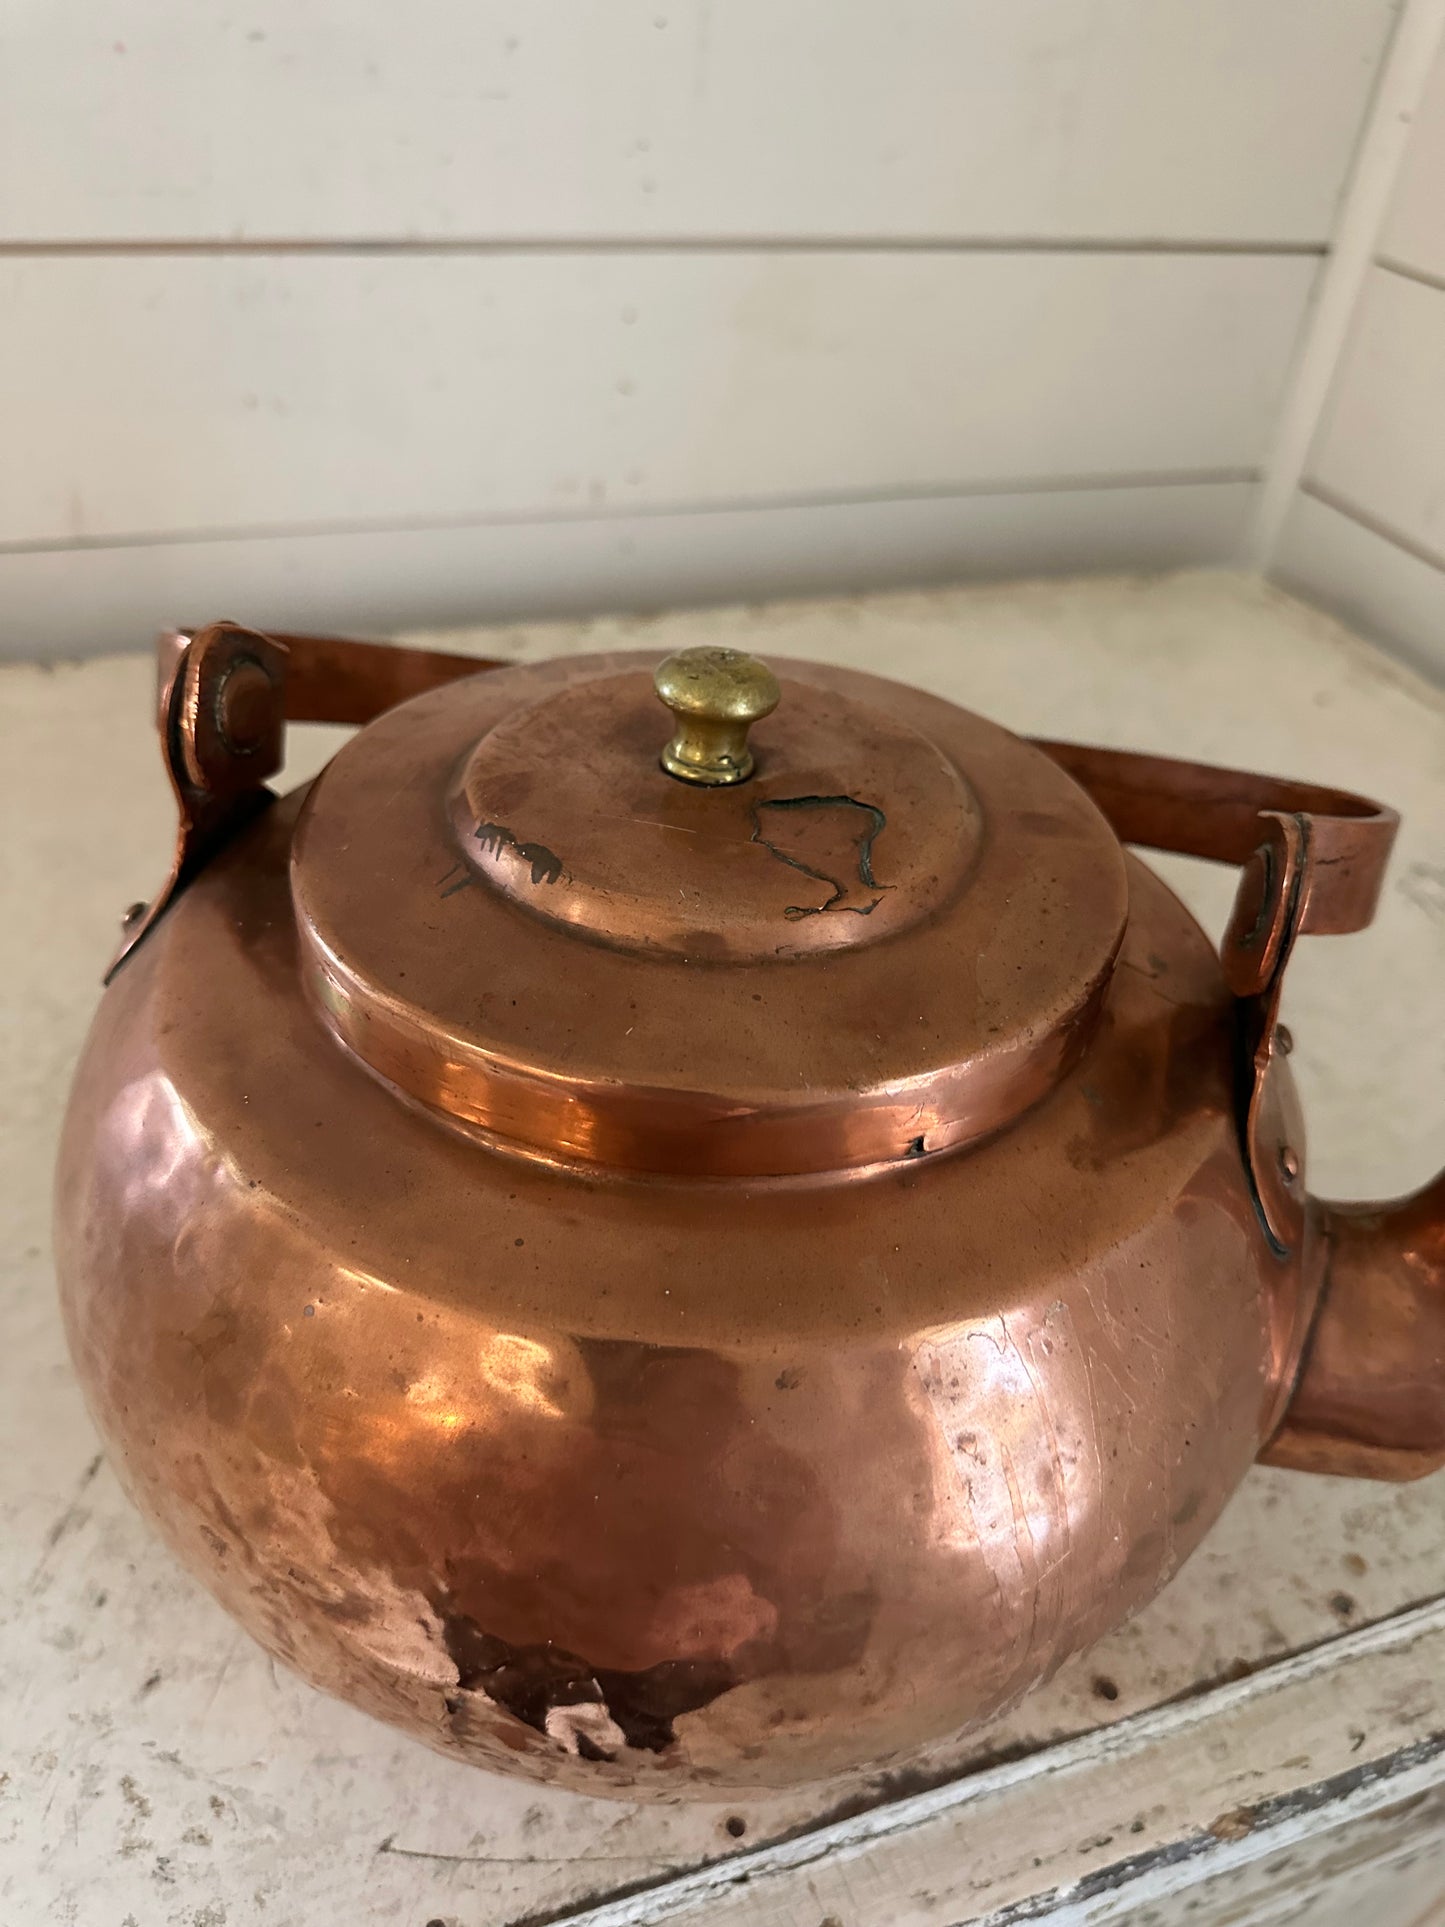 19th Century Copper Kettle has a repair on top